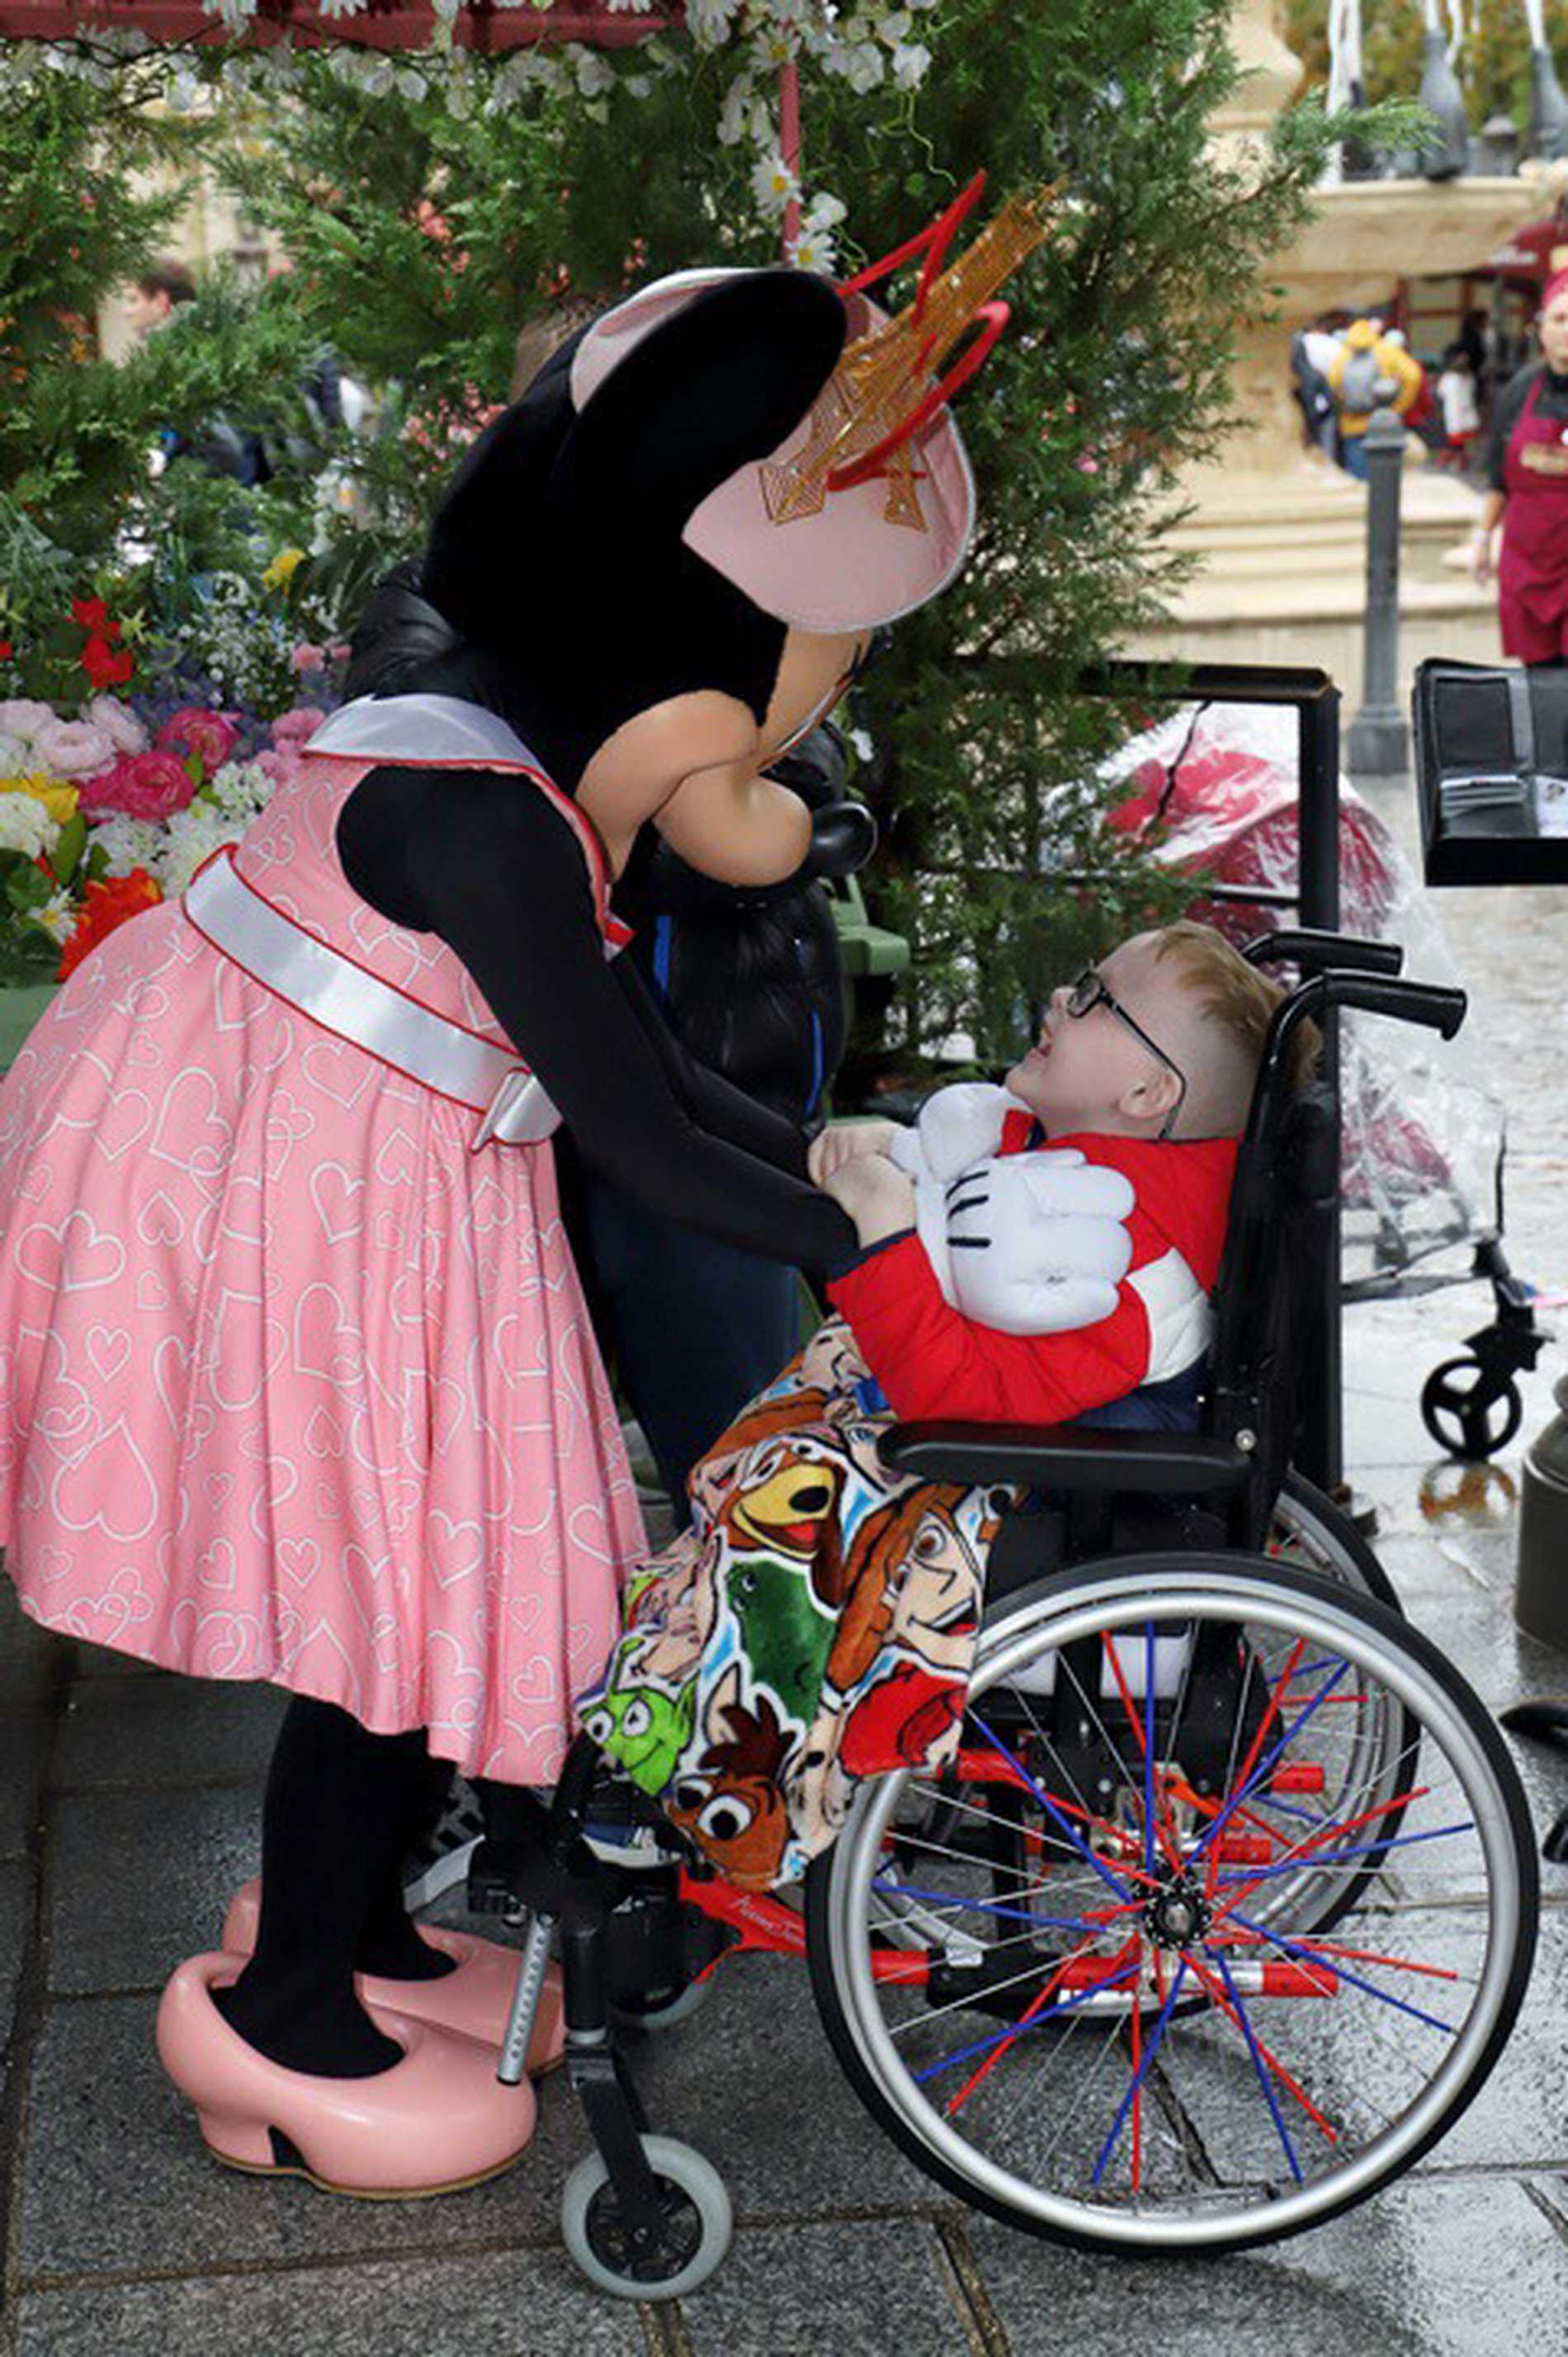 Patrick sitting in his wheelchair with a big smile as he meets Minnie Mouse.